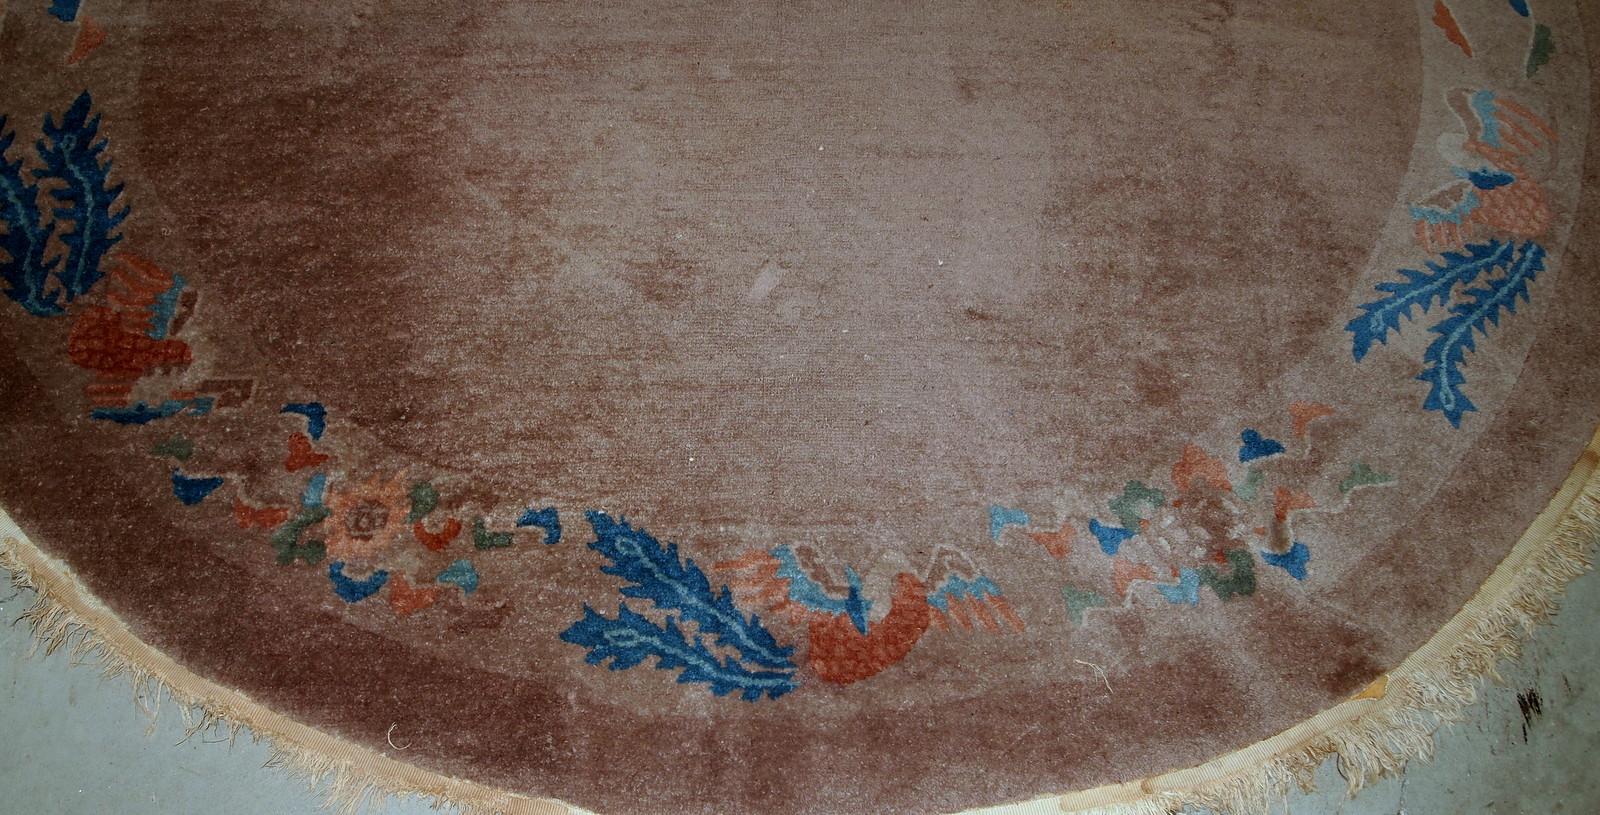 Handmade antique Art Deco Chinese rug in oval shape. The rug is from the beginning of 20th century in original condition, it has some low pile.

?-Condition: original, low pile,

-circa: 1910s,

-Size: 5.1' x 8.3' (155cm x